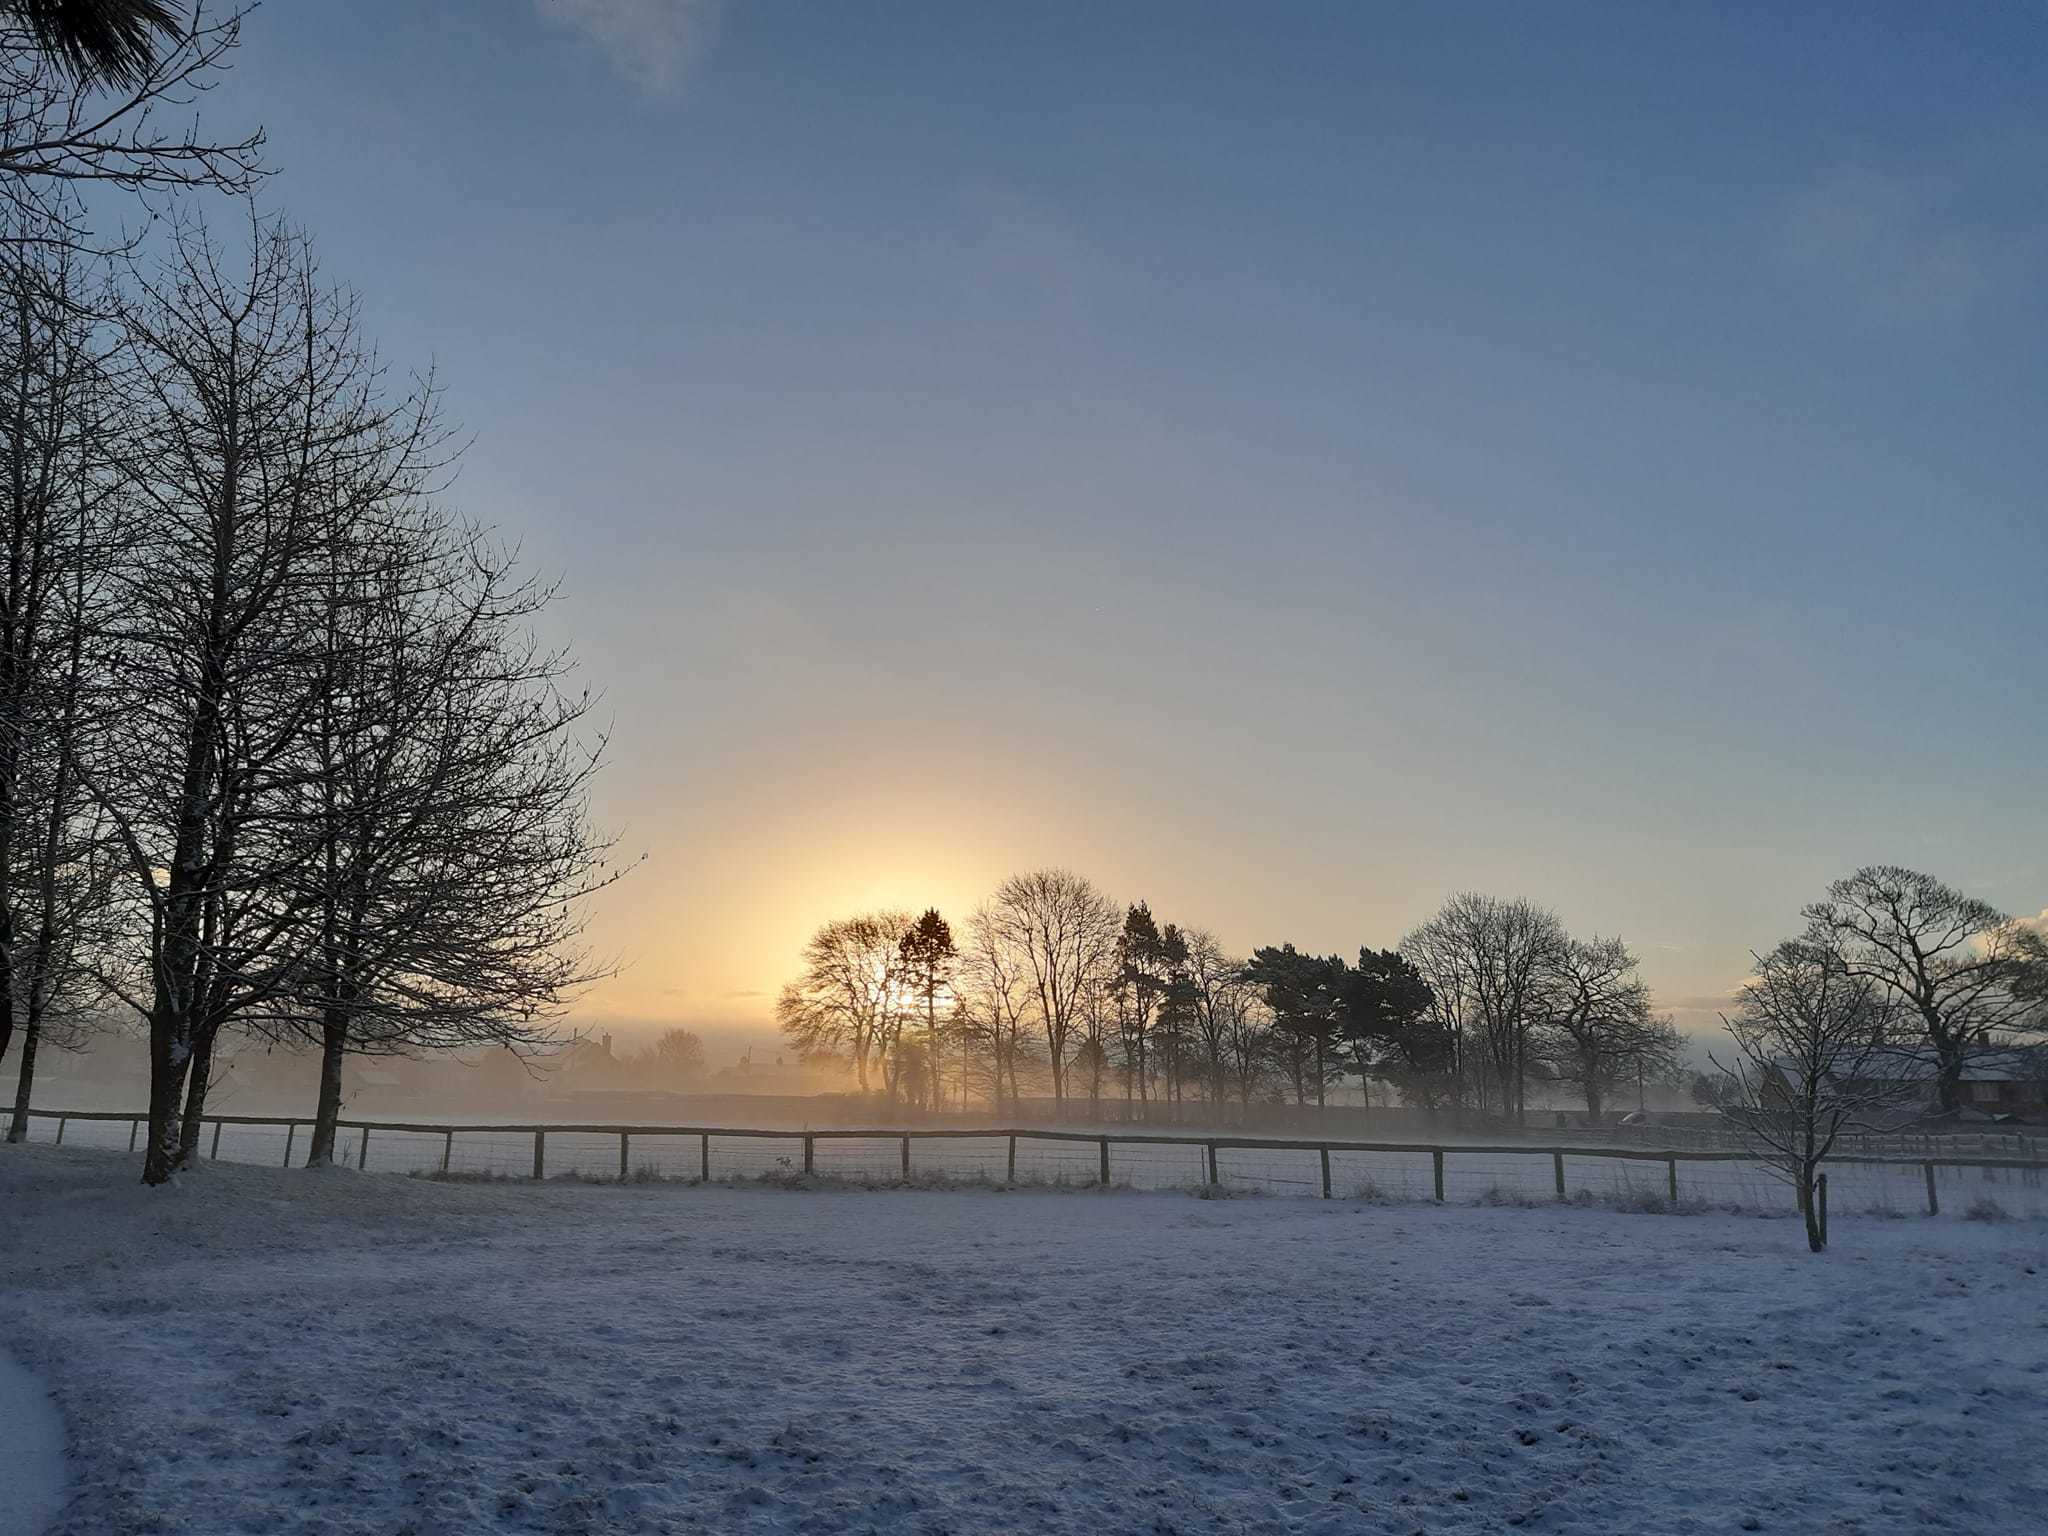 Sunrise in Mobberley by Lysiane Gilmour